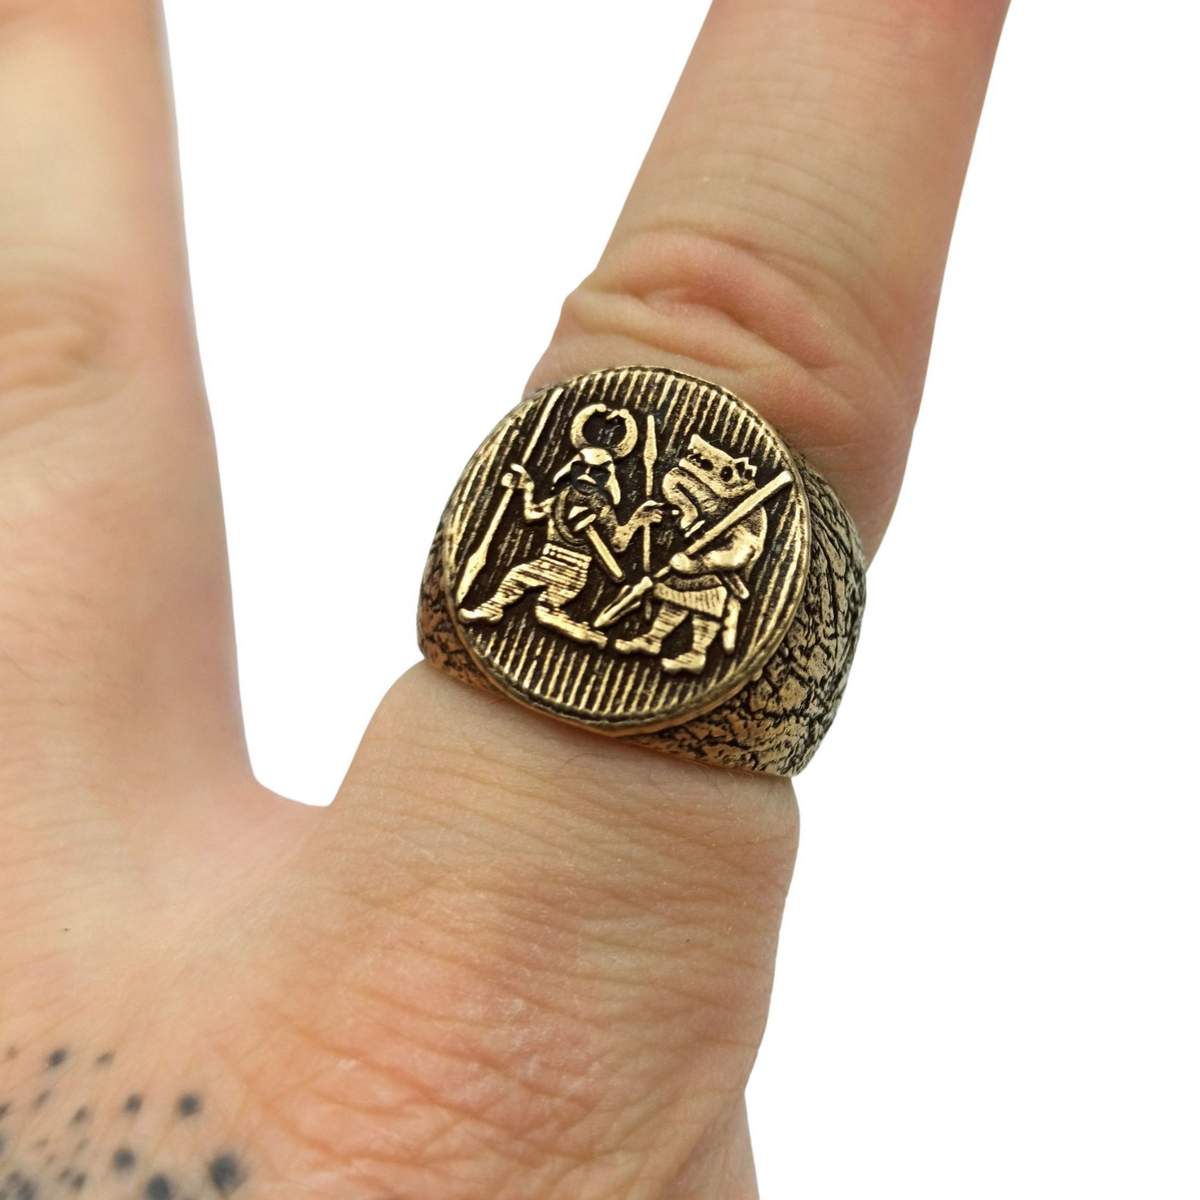 ChainsProMax Eye of Ra Horus Pinky Ring Size 7 Male Ring Stainless Steel  Ring|Amazon.com